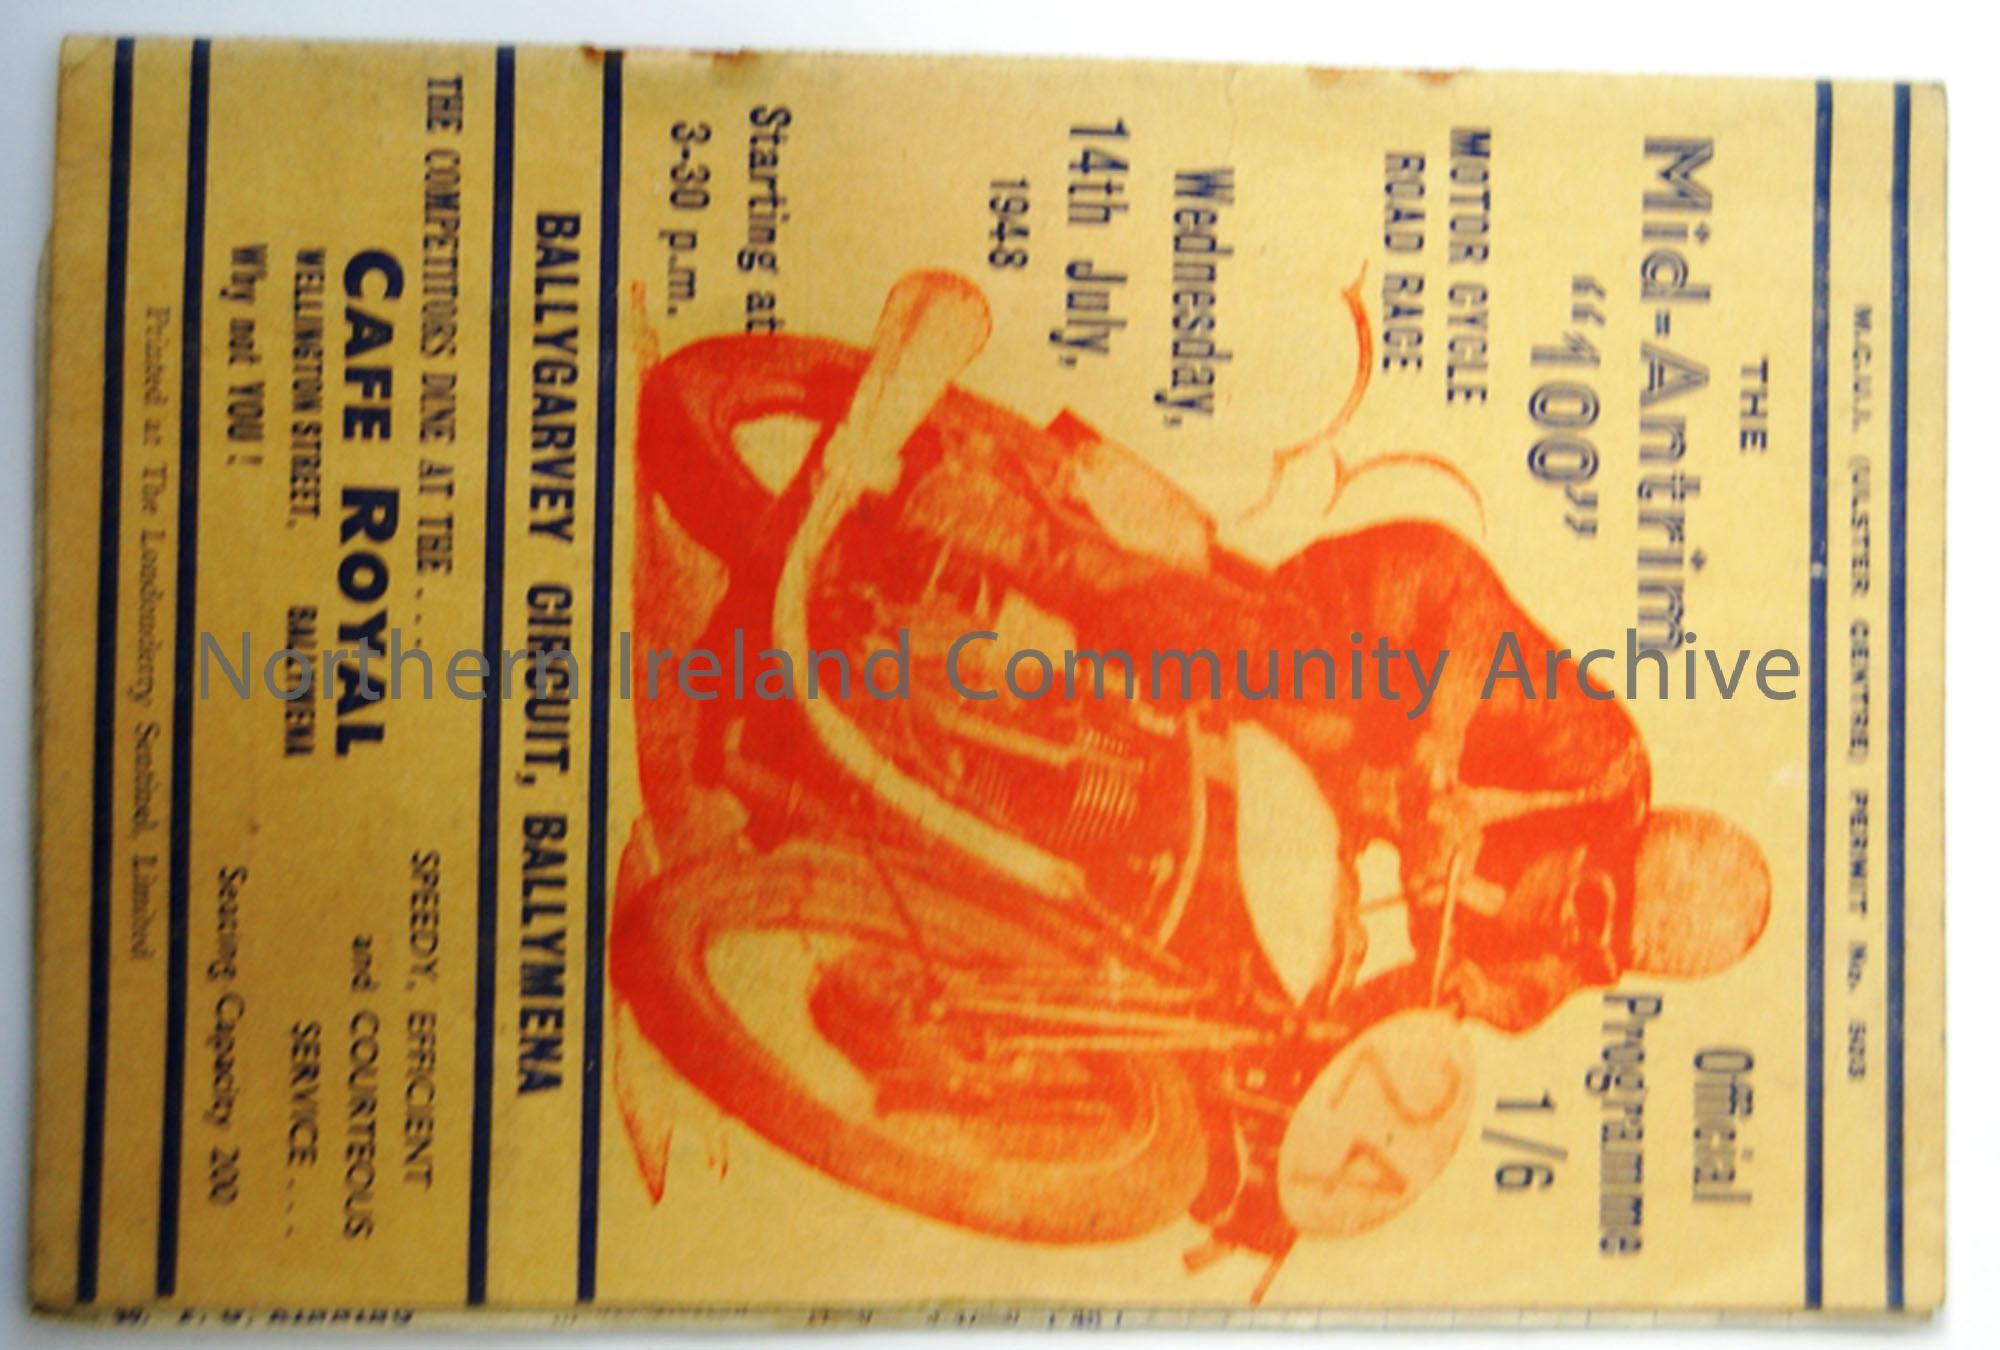 The Mid-Antrim ‘100’ Motorcycle road race, Wednesday 14th July, 1948 starting at 3.30pm, Ballygarvey circuit, Ballymena.